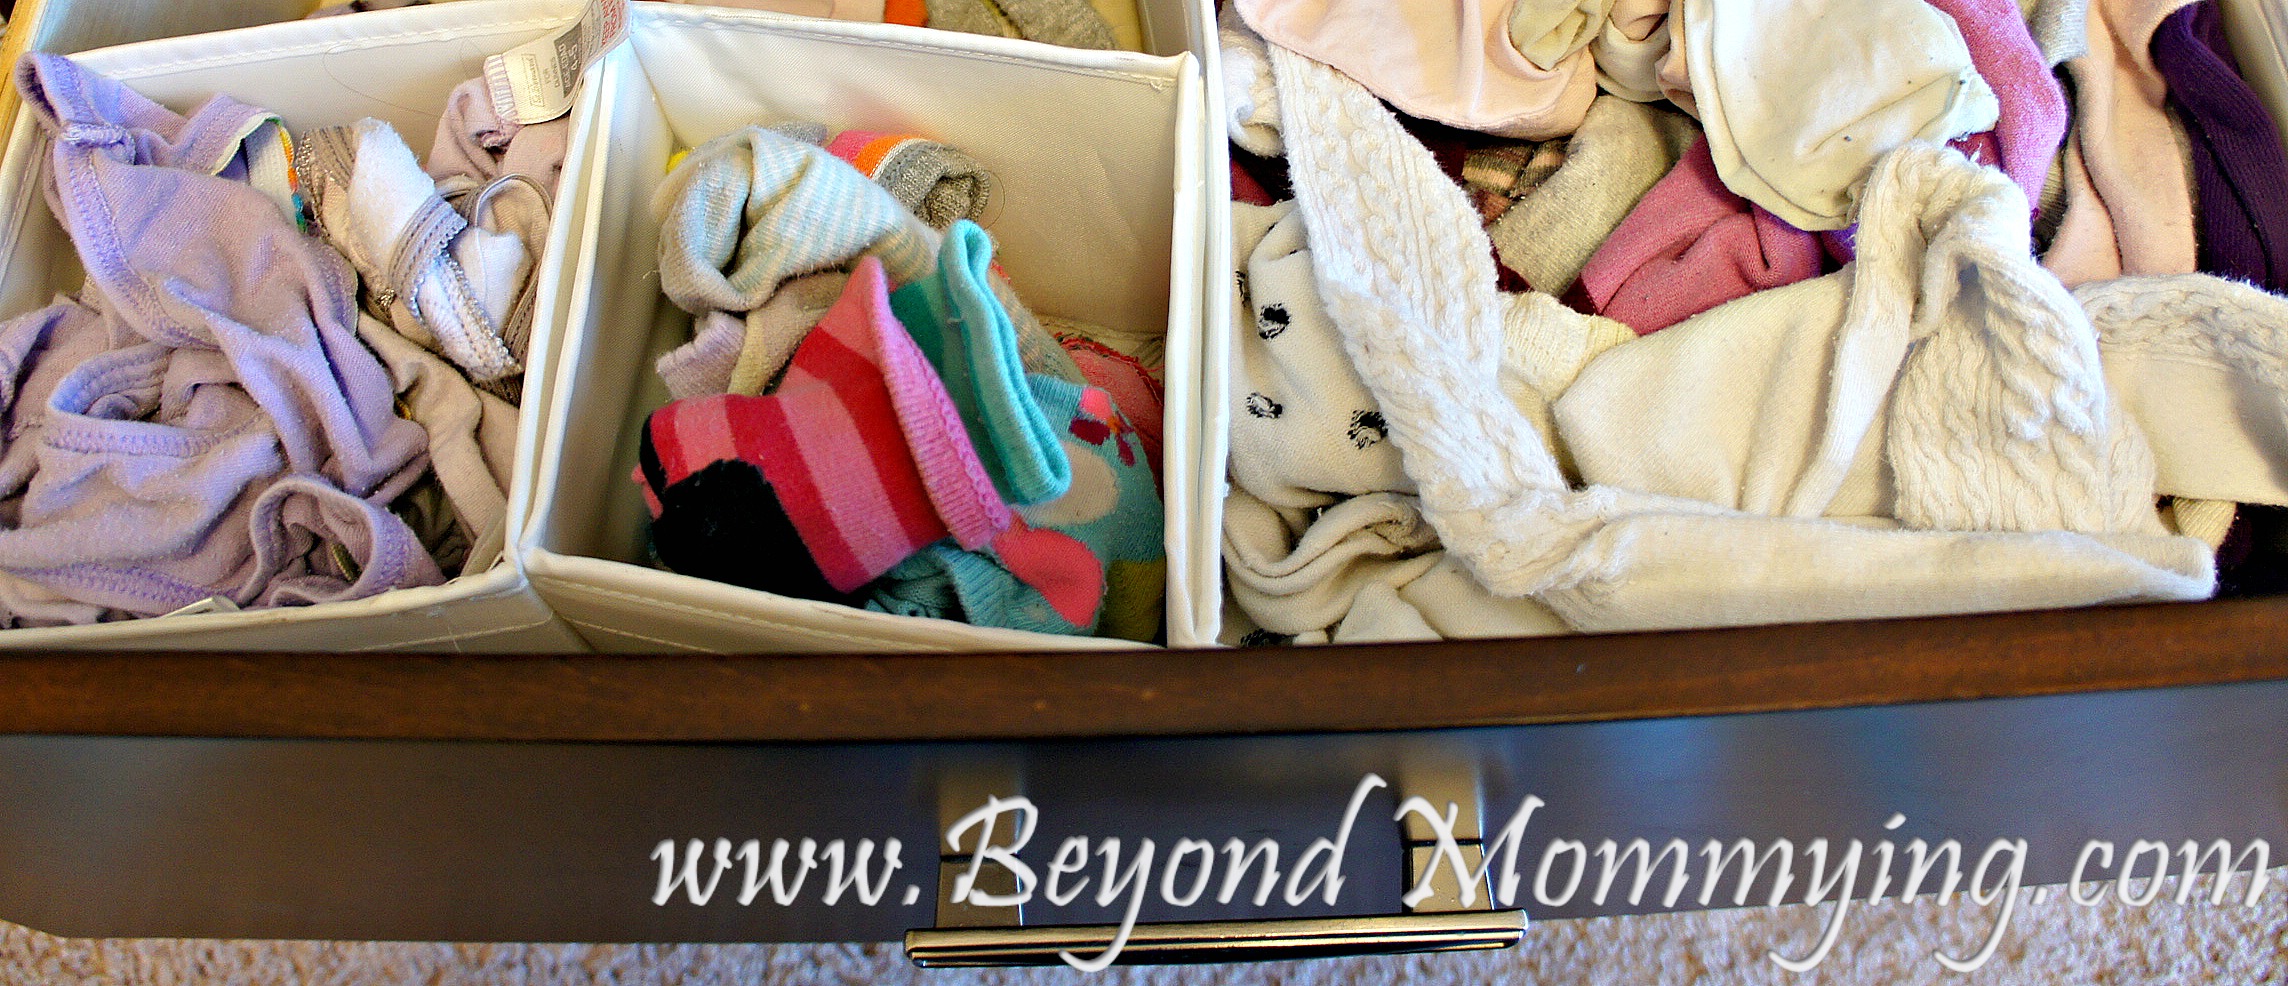 Using small basket for organizing kids' small laundry items in drawers